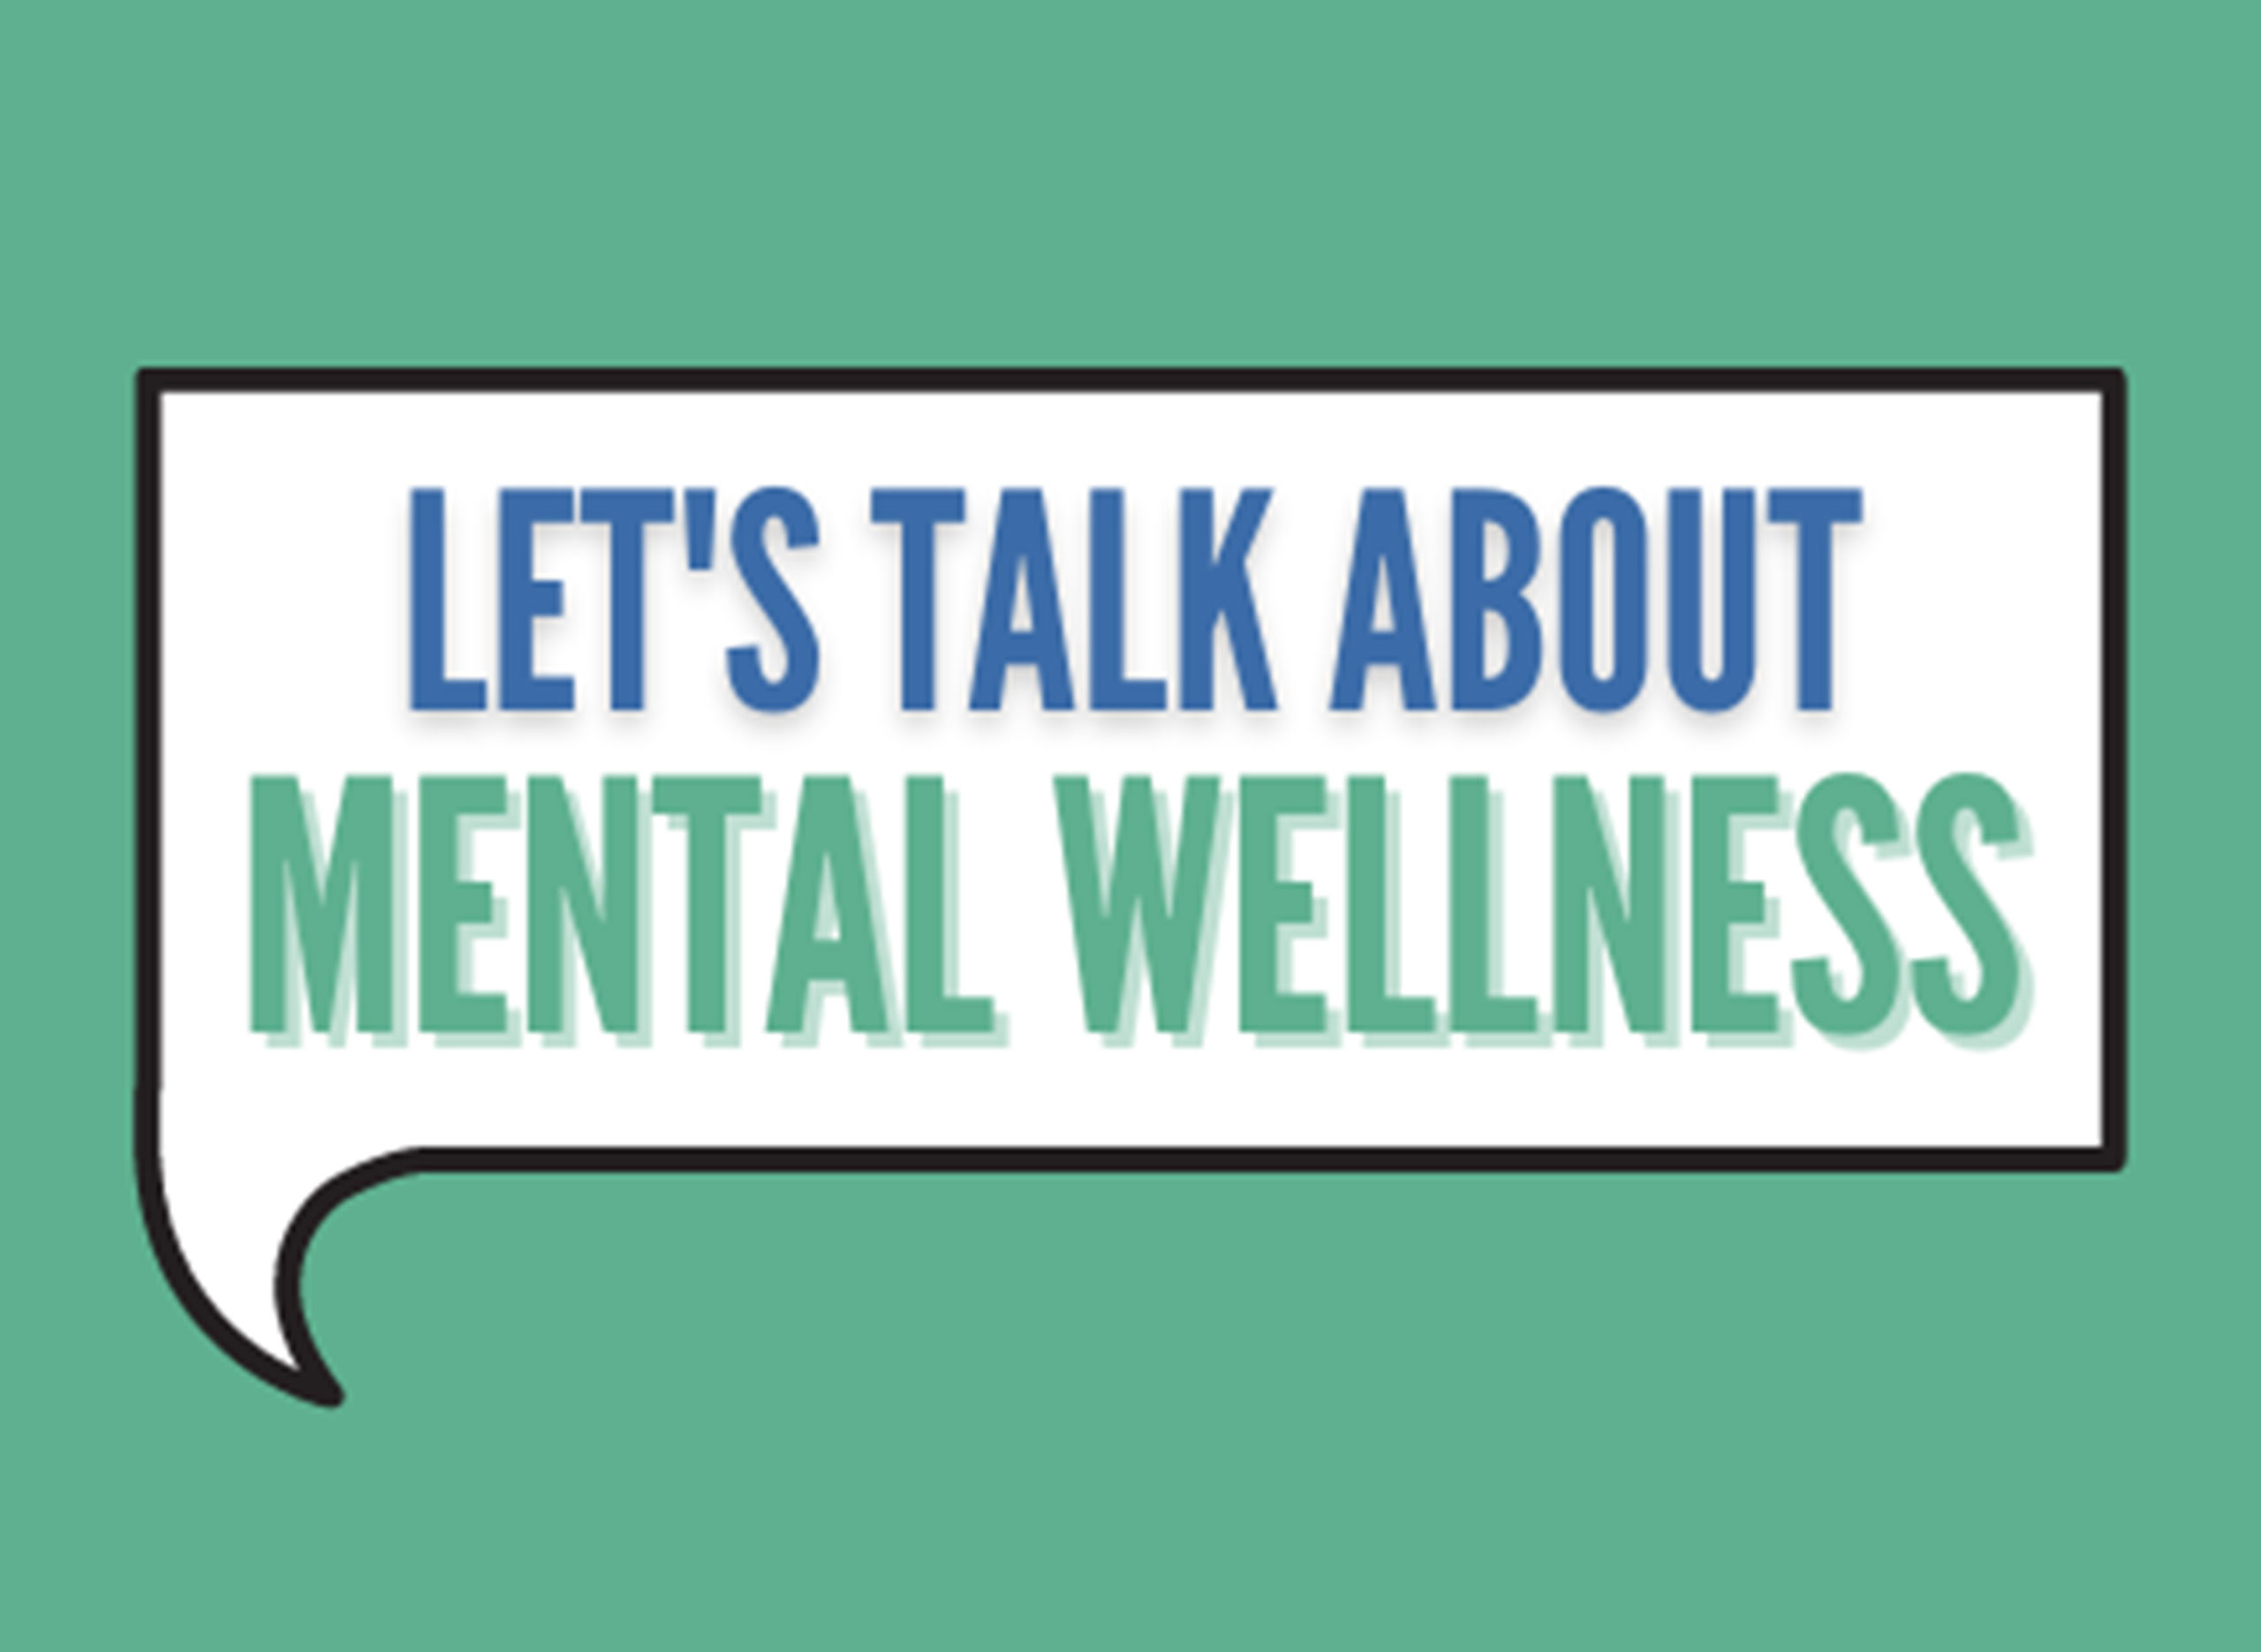 United Way of CNY podcast talks about mental wellness